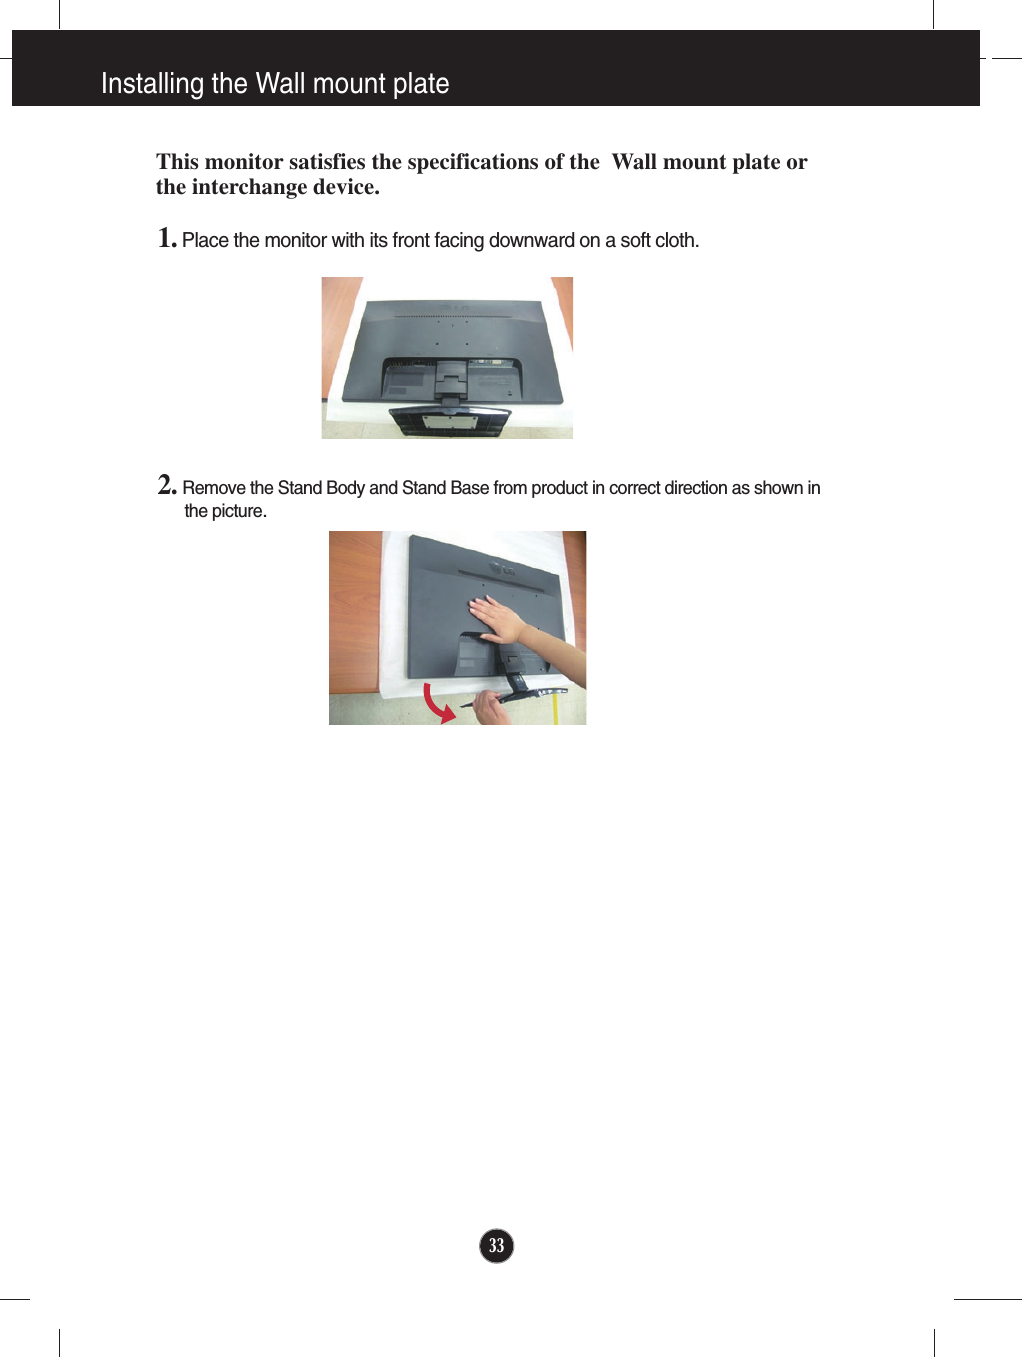 331. Place the monitor with its front facing downward on a soft cloth.2. Remove the Stand Body and Stand Base from product in correct direction as shown inthe picture.Installing the Wall mount plateThis monitor satisfies the specifications of the  Wall mount plate orthe interchange device.